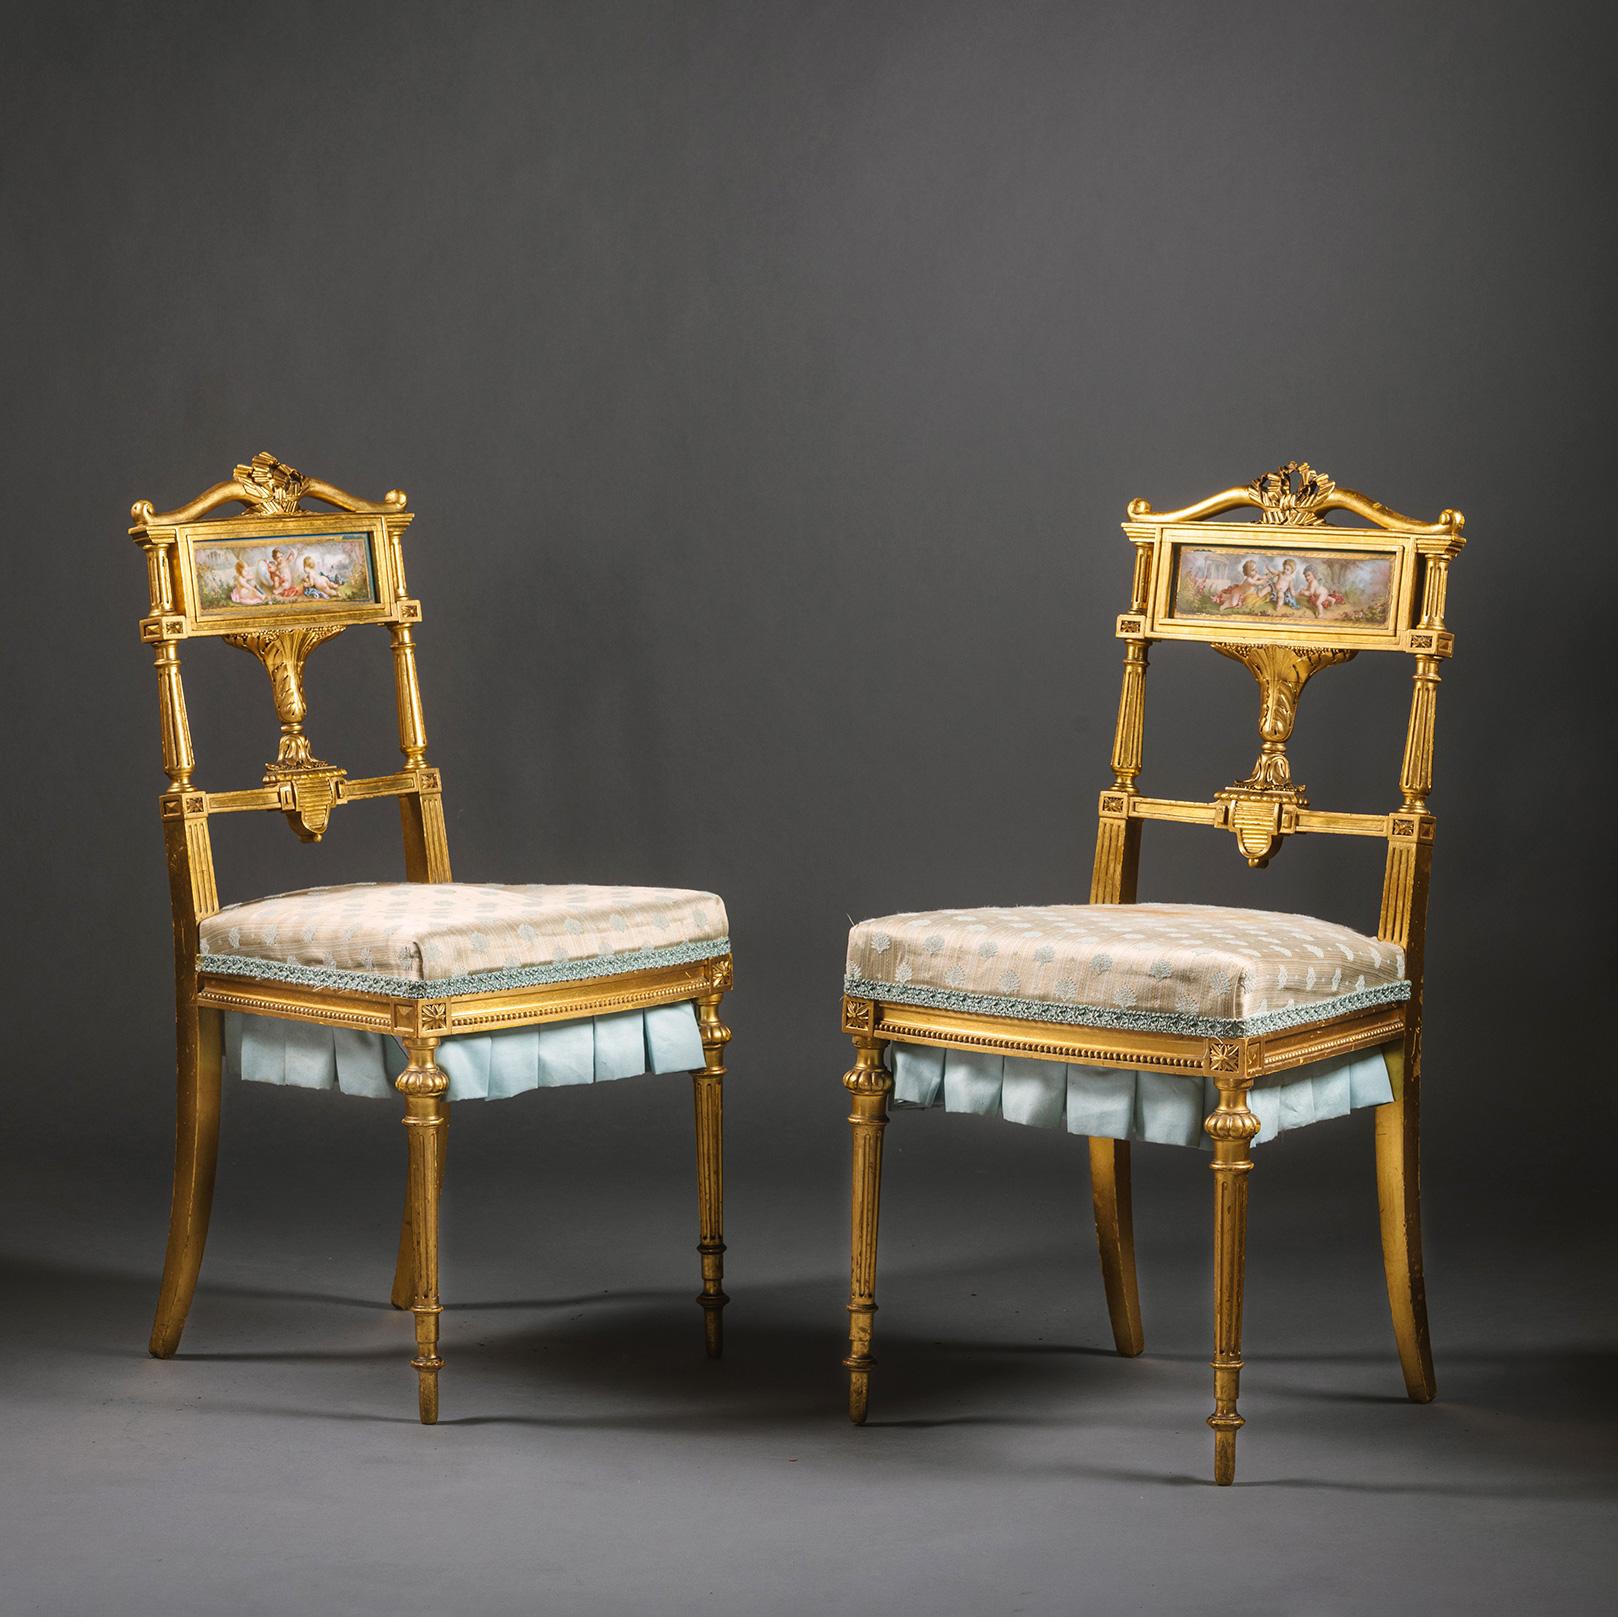 A Pair of Louis XVI Style Giltwood and Sèvres-Style Porcelain Mounted Salon or Bedroom Chairs

These charming chairs are delicately carved and adorned with attributes of love. The top rail is carved as a bow centred by a ribbon. The Sèvres style